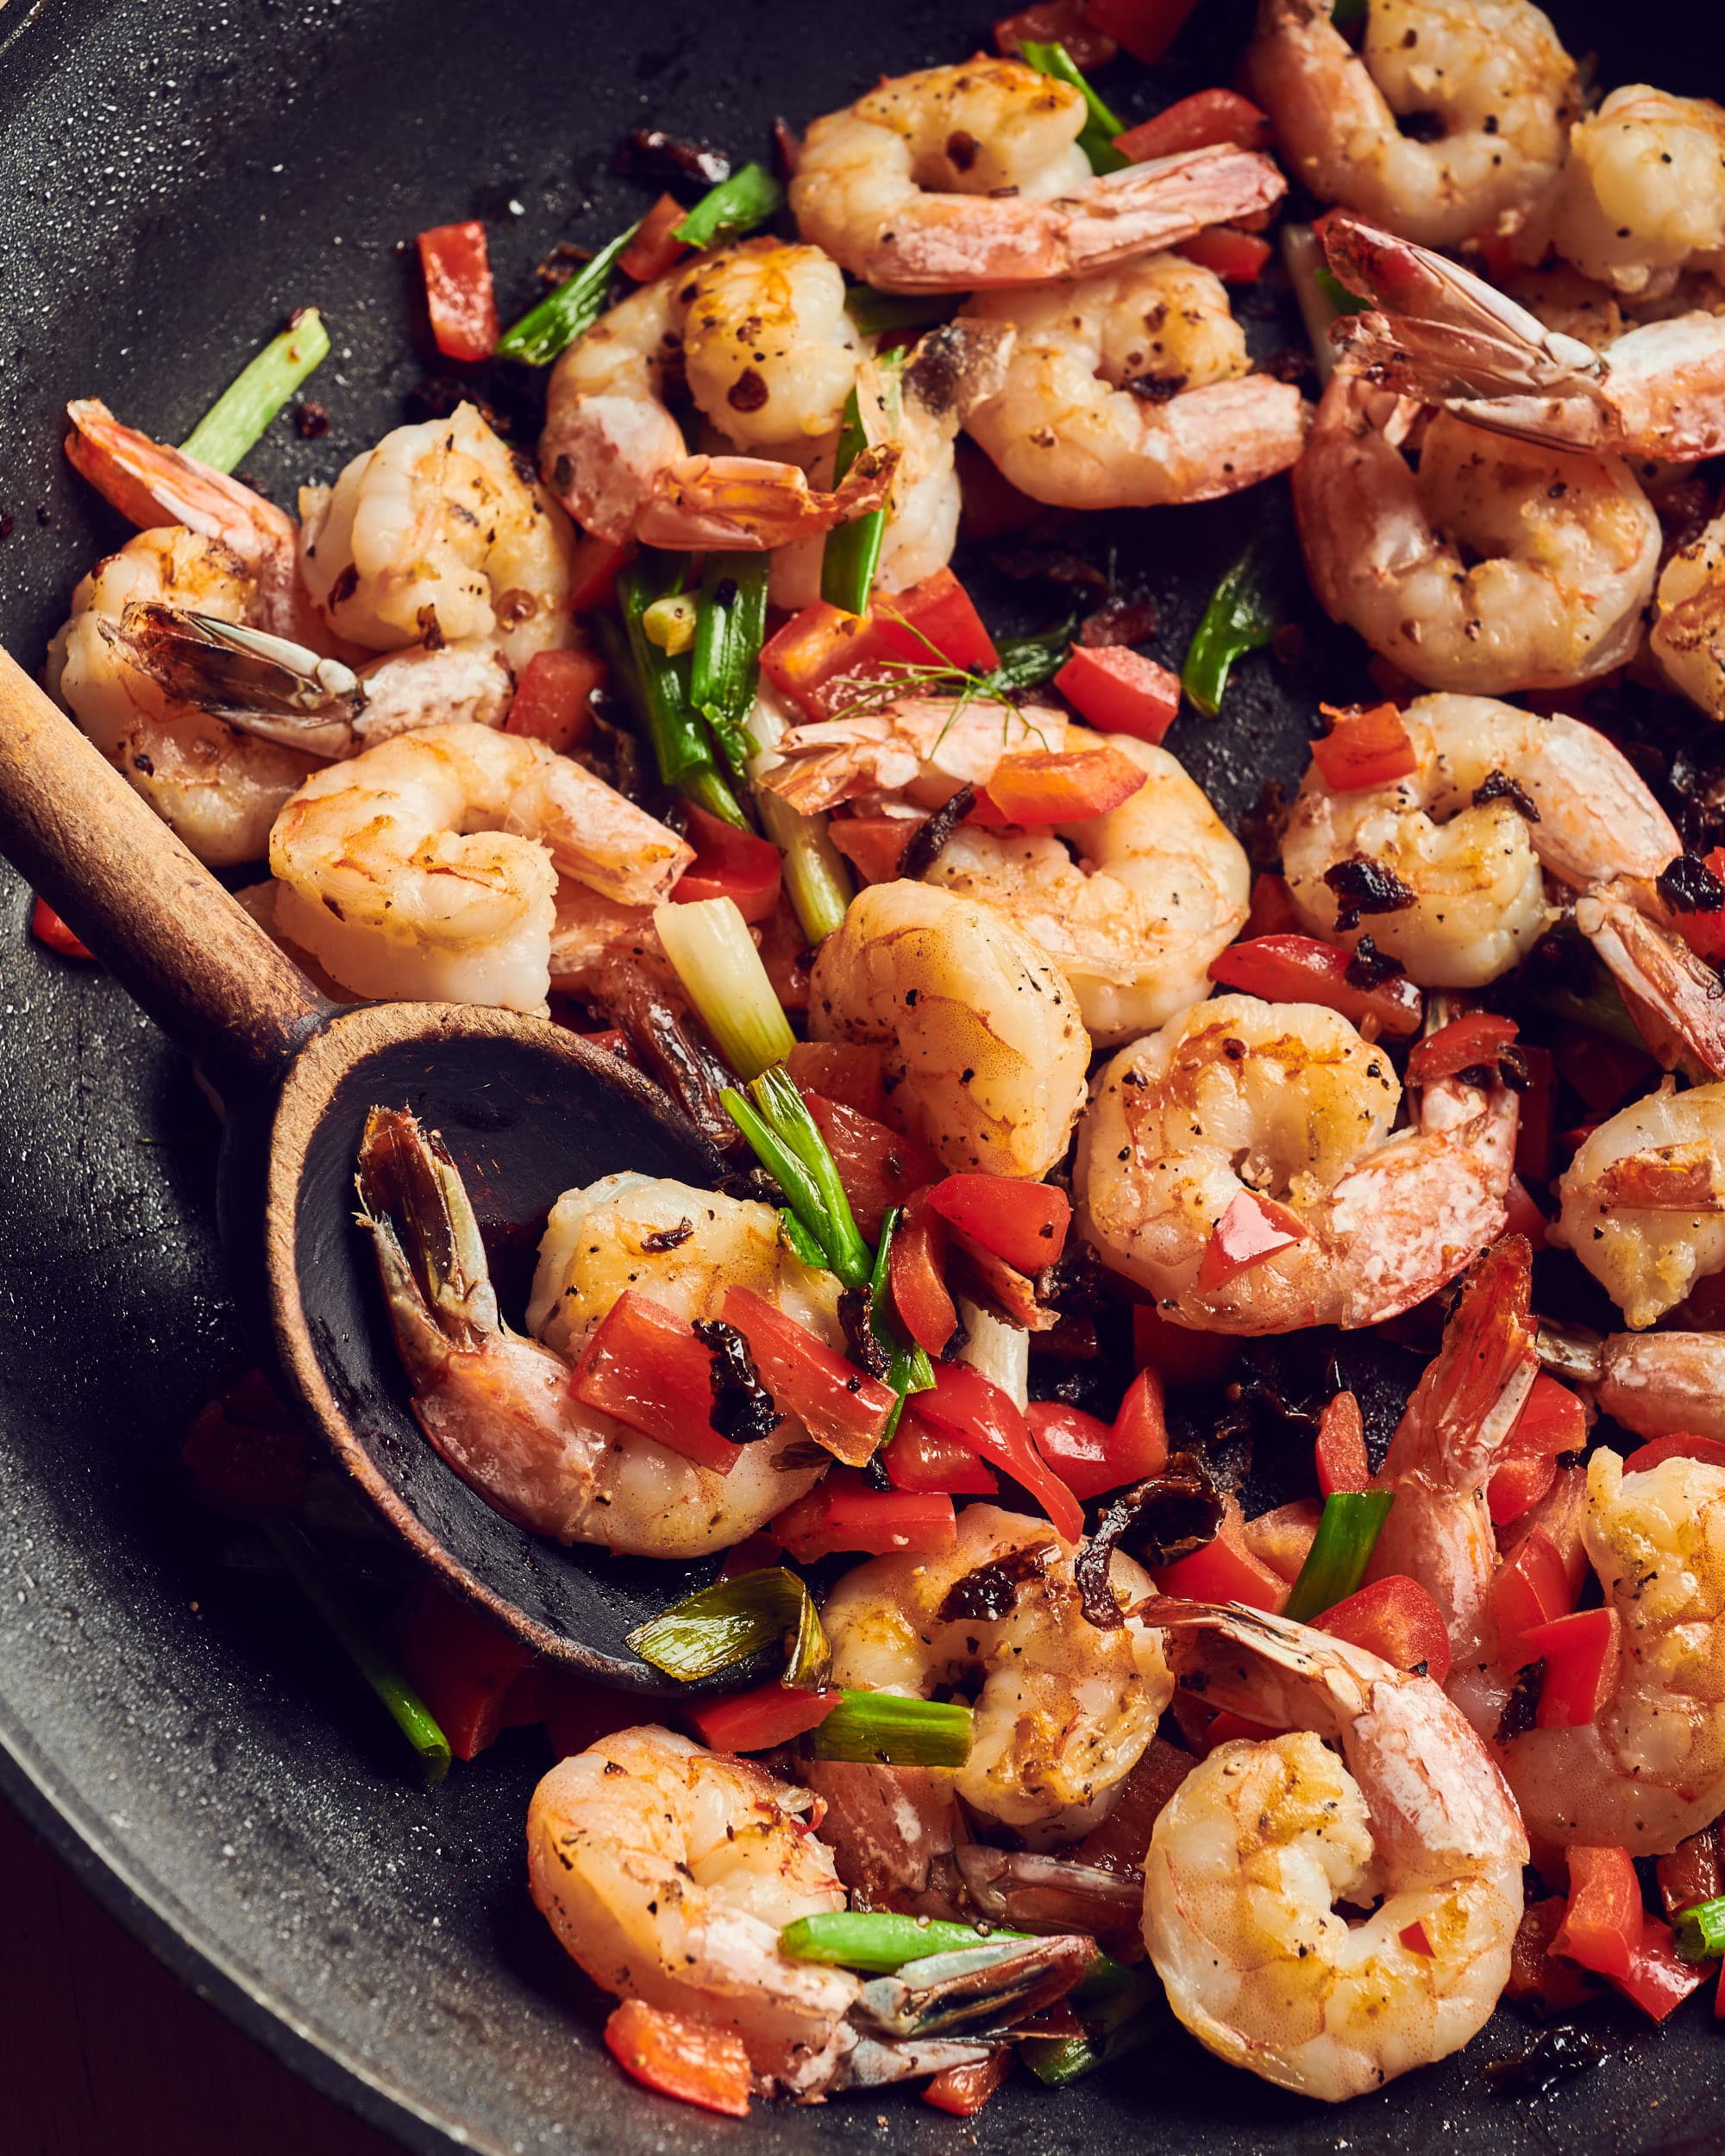 https://cdn.apartmenttherapy.info/image/upload/v1605907906/k/Photo/Series/2020-11-Snapshot-1-lb-shrimp-dinners/Snapshot-Wrap-Up_5-Quick-Dinners-with%20Frozen-Shrimp_Spicy-Chili-Saute/2020-11-18_ATK36323.jpg